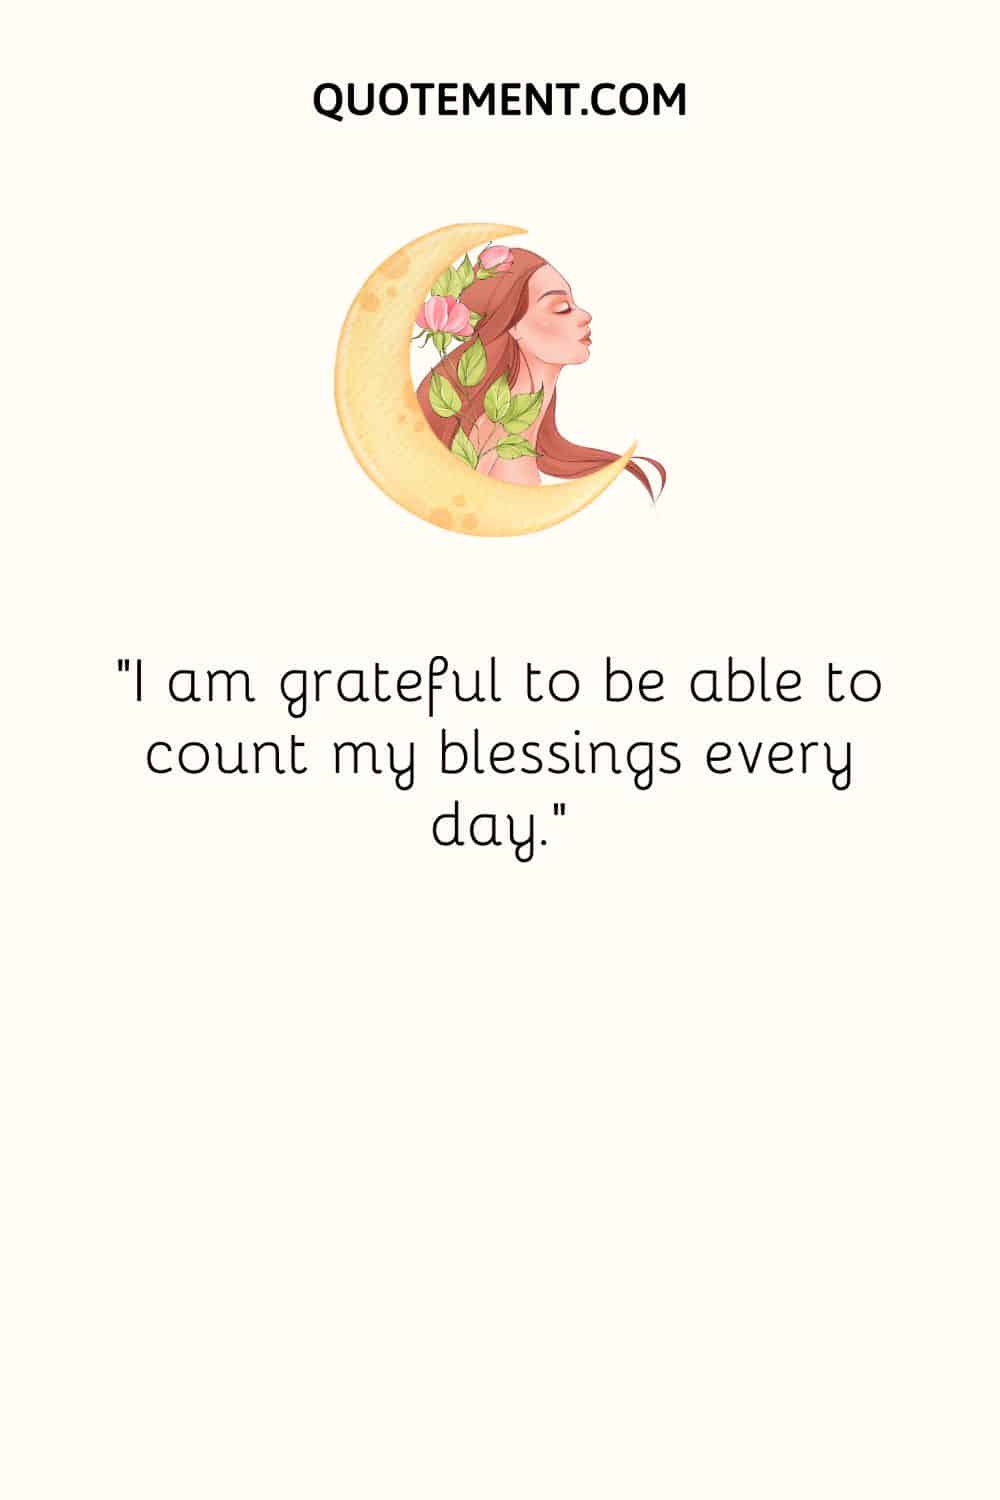 I am grateful to be able to count my blessings every day